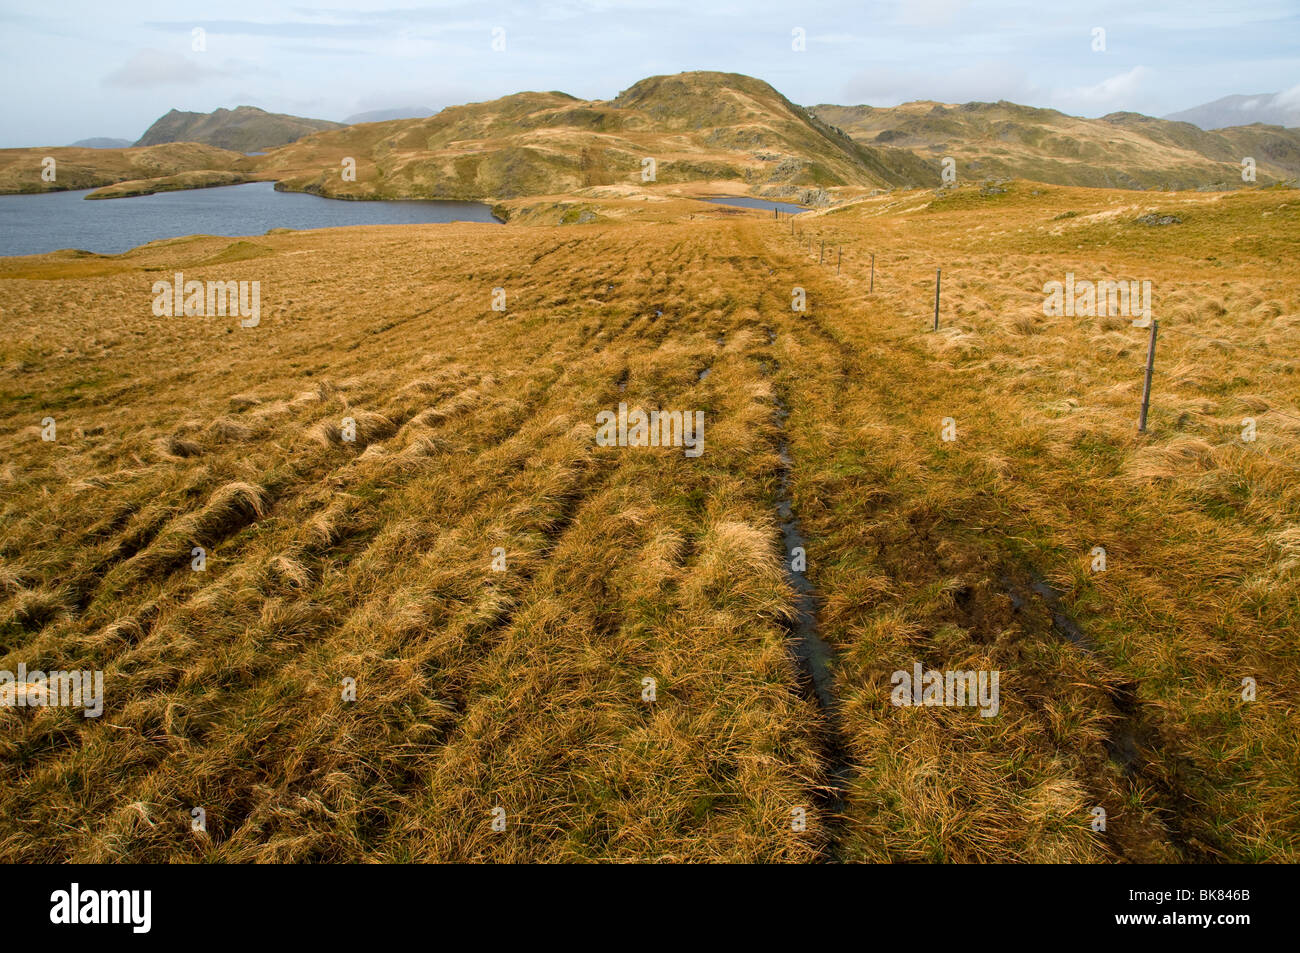 Environmental damage caused by off-road bikers, in the Moelwyn hills, Snowdonia, North Wales, UK Stock Photo